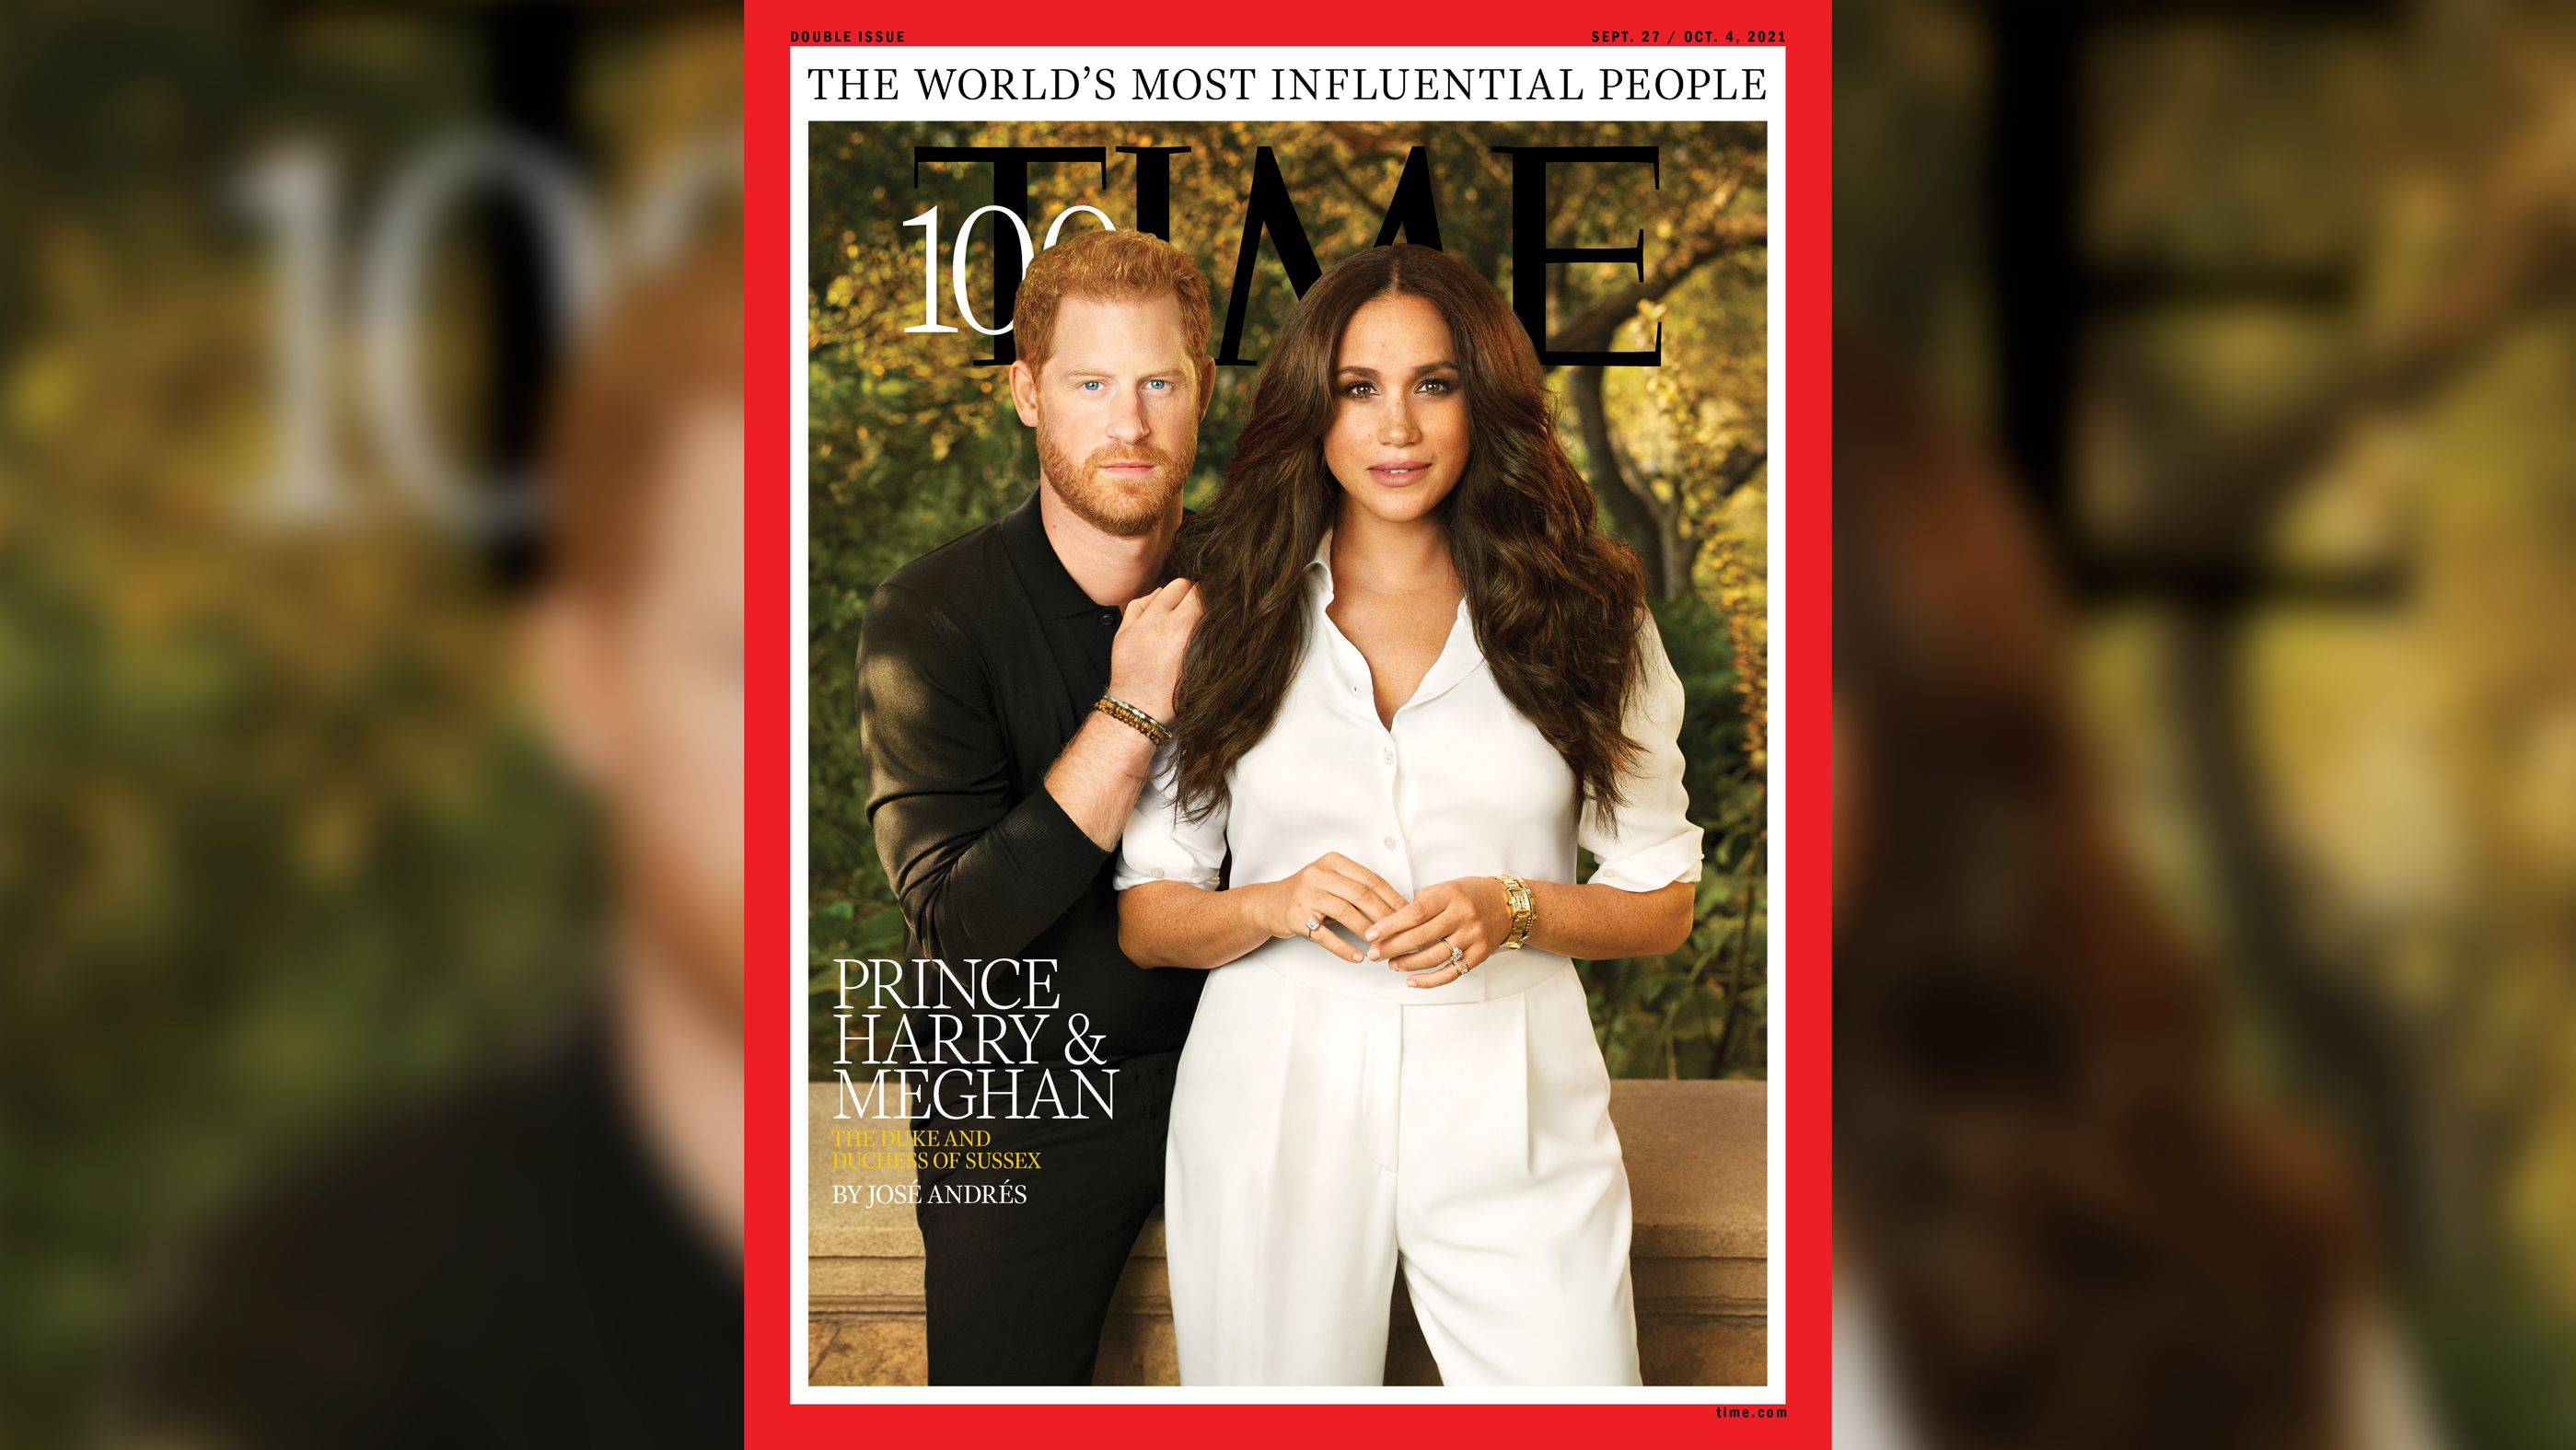 Meghan and Harry grace one of the multiple covers of Time showcasing the publication's annual list of the 100 most influential people.